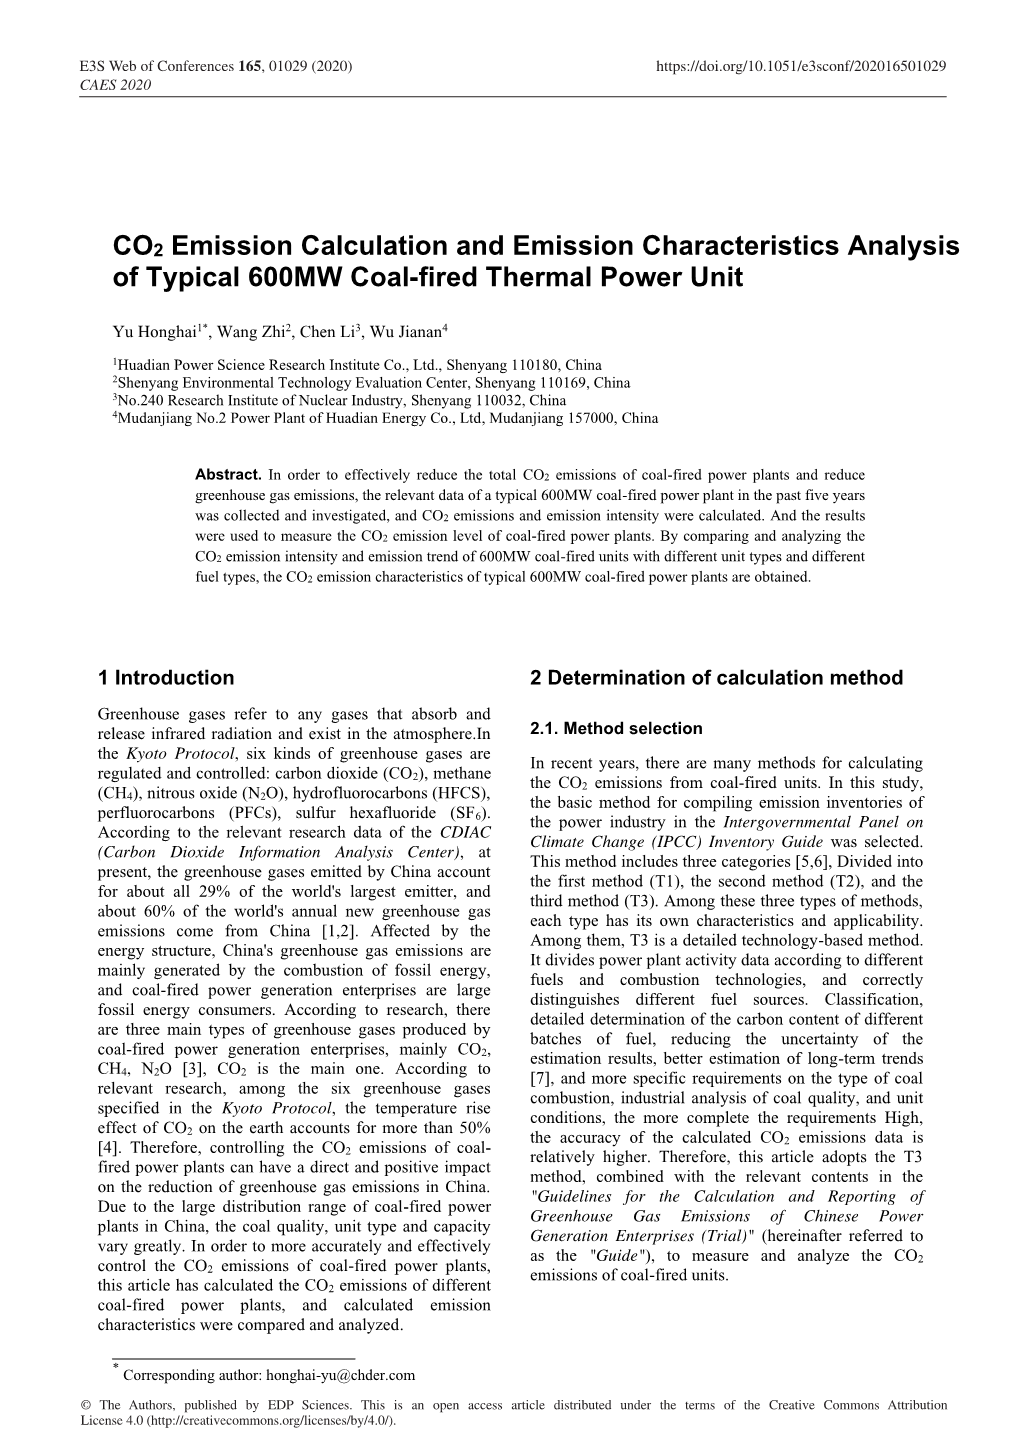 CO2 Emission Calculation and Emission Characteristics Analysis of Typical 600MW Coal-Fired Thermal Power Unit